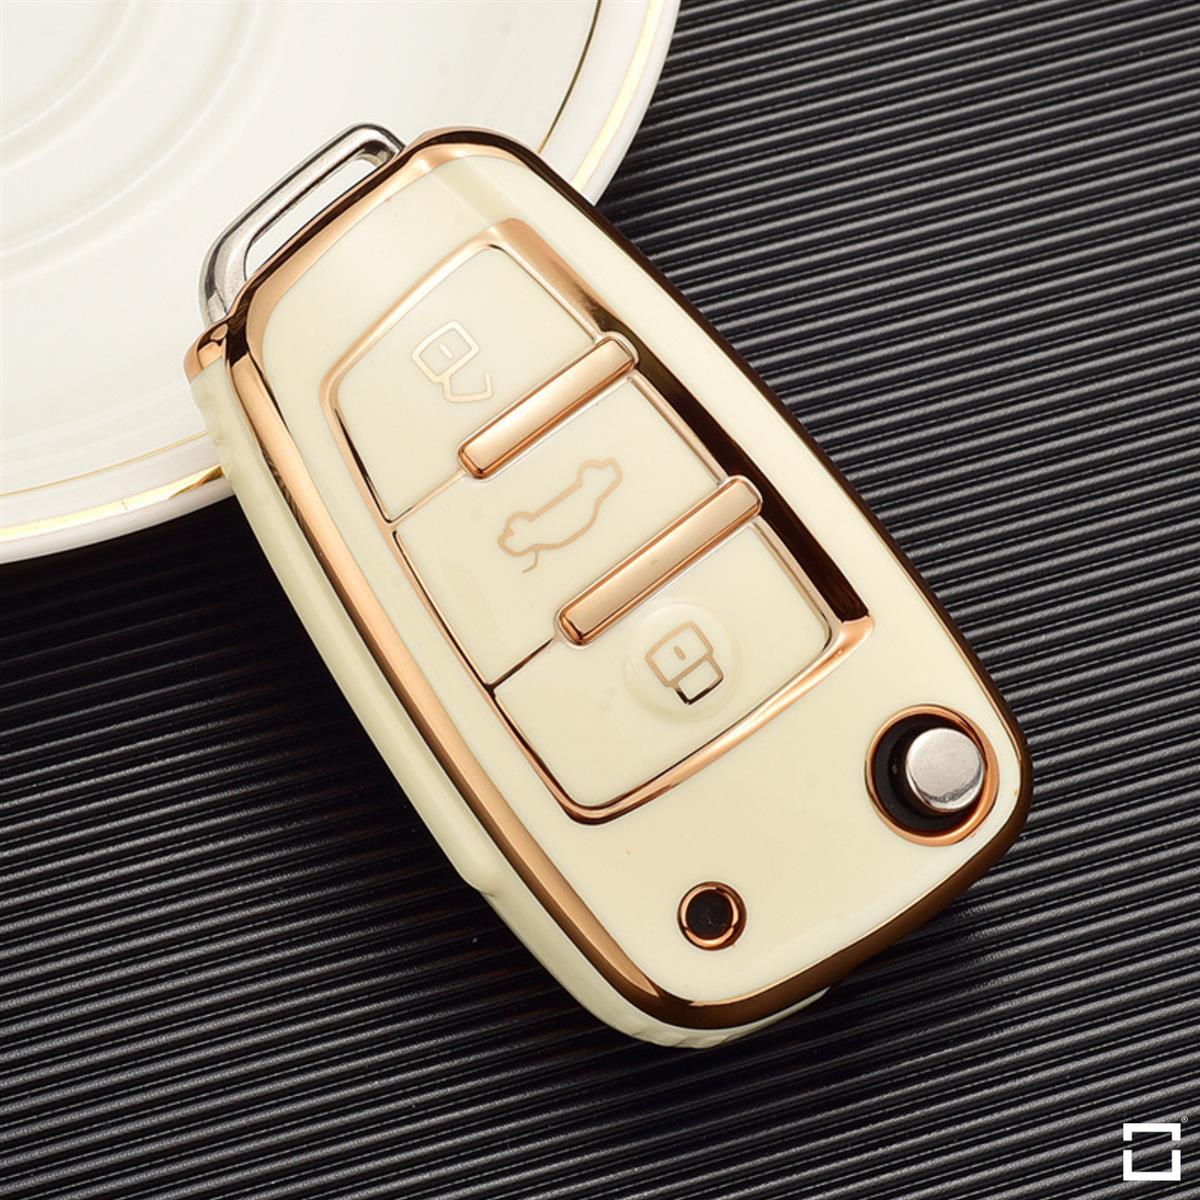 Glossy TPU key cover / protective cover (SEK18) suitable for Audi keys